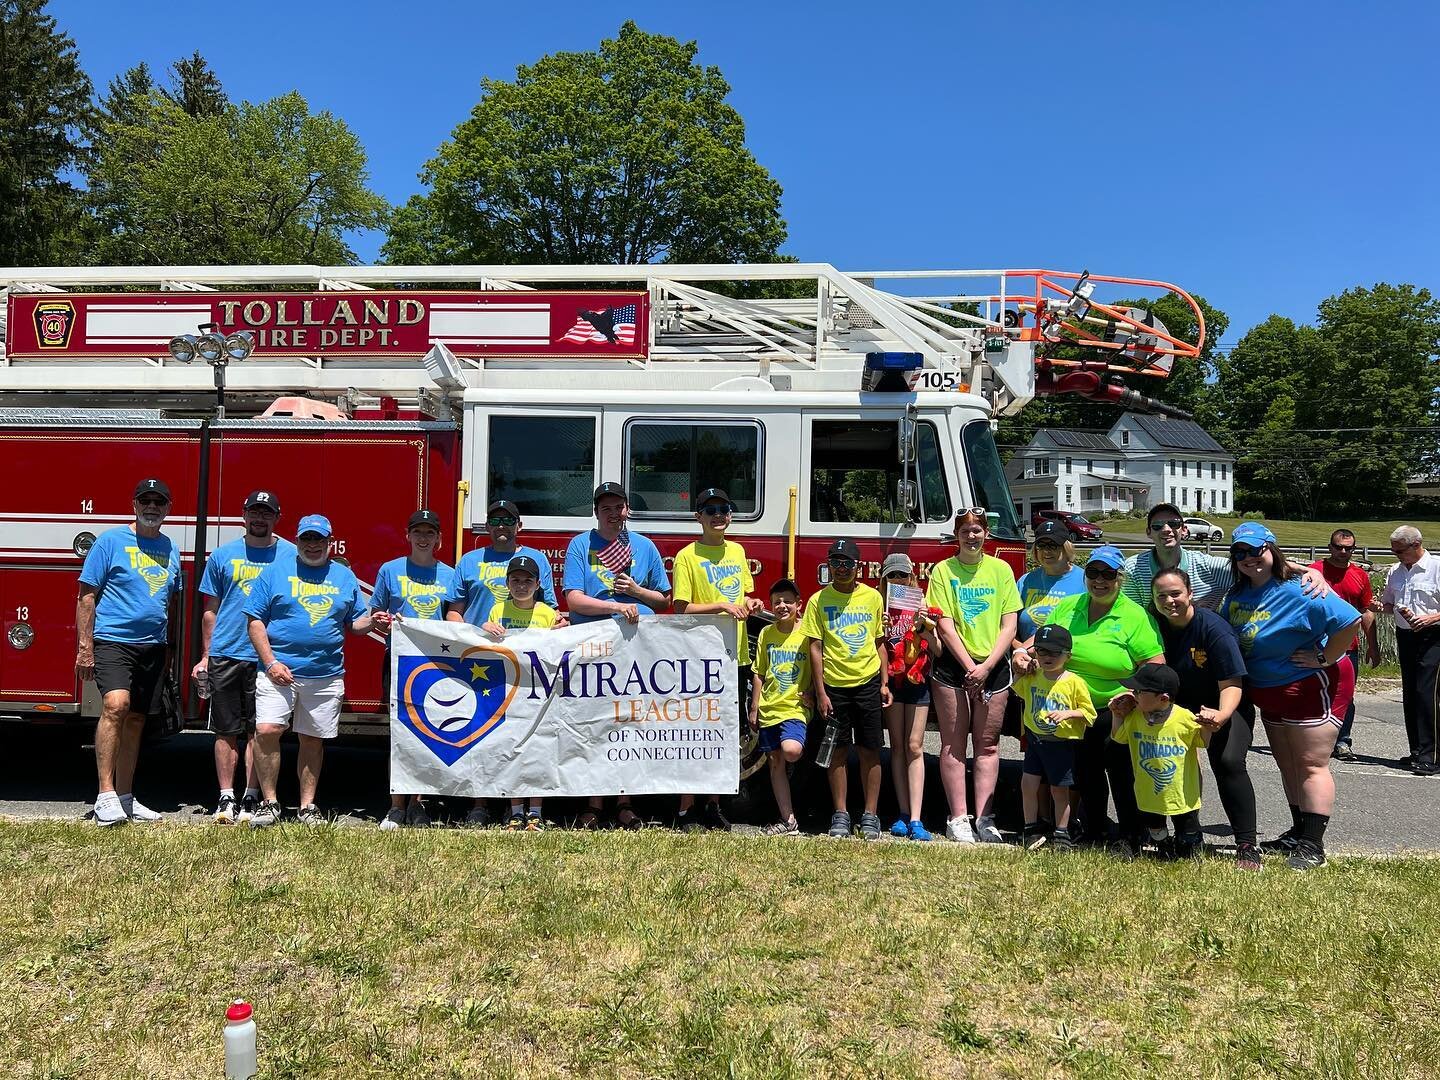 The Tolland Torandoes had a funtastic time marching with @tollandfiredept today in the Tolland Memorial Day Parade!!